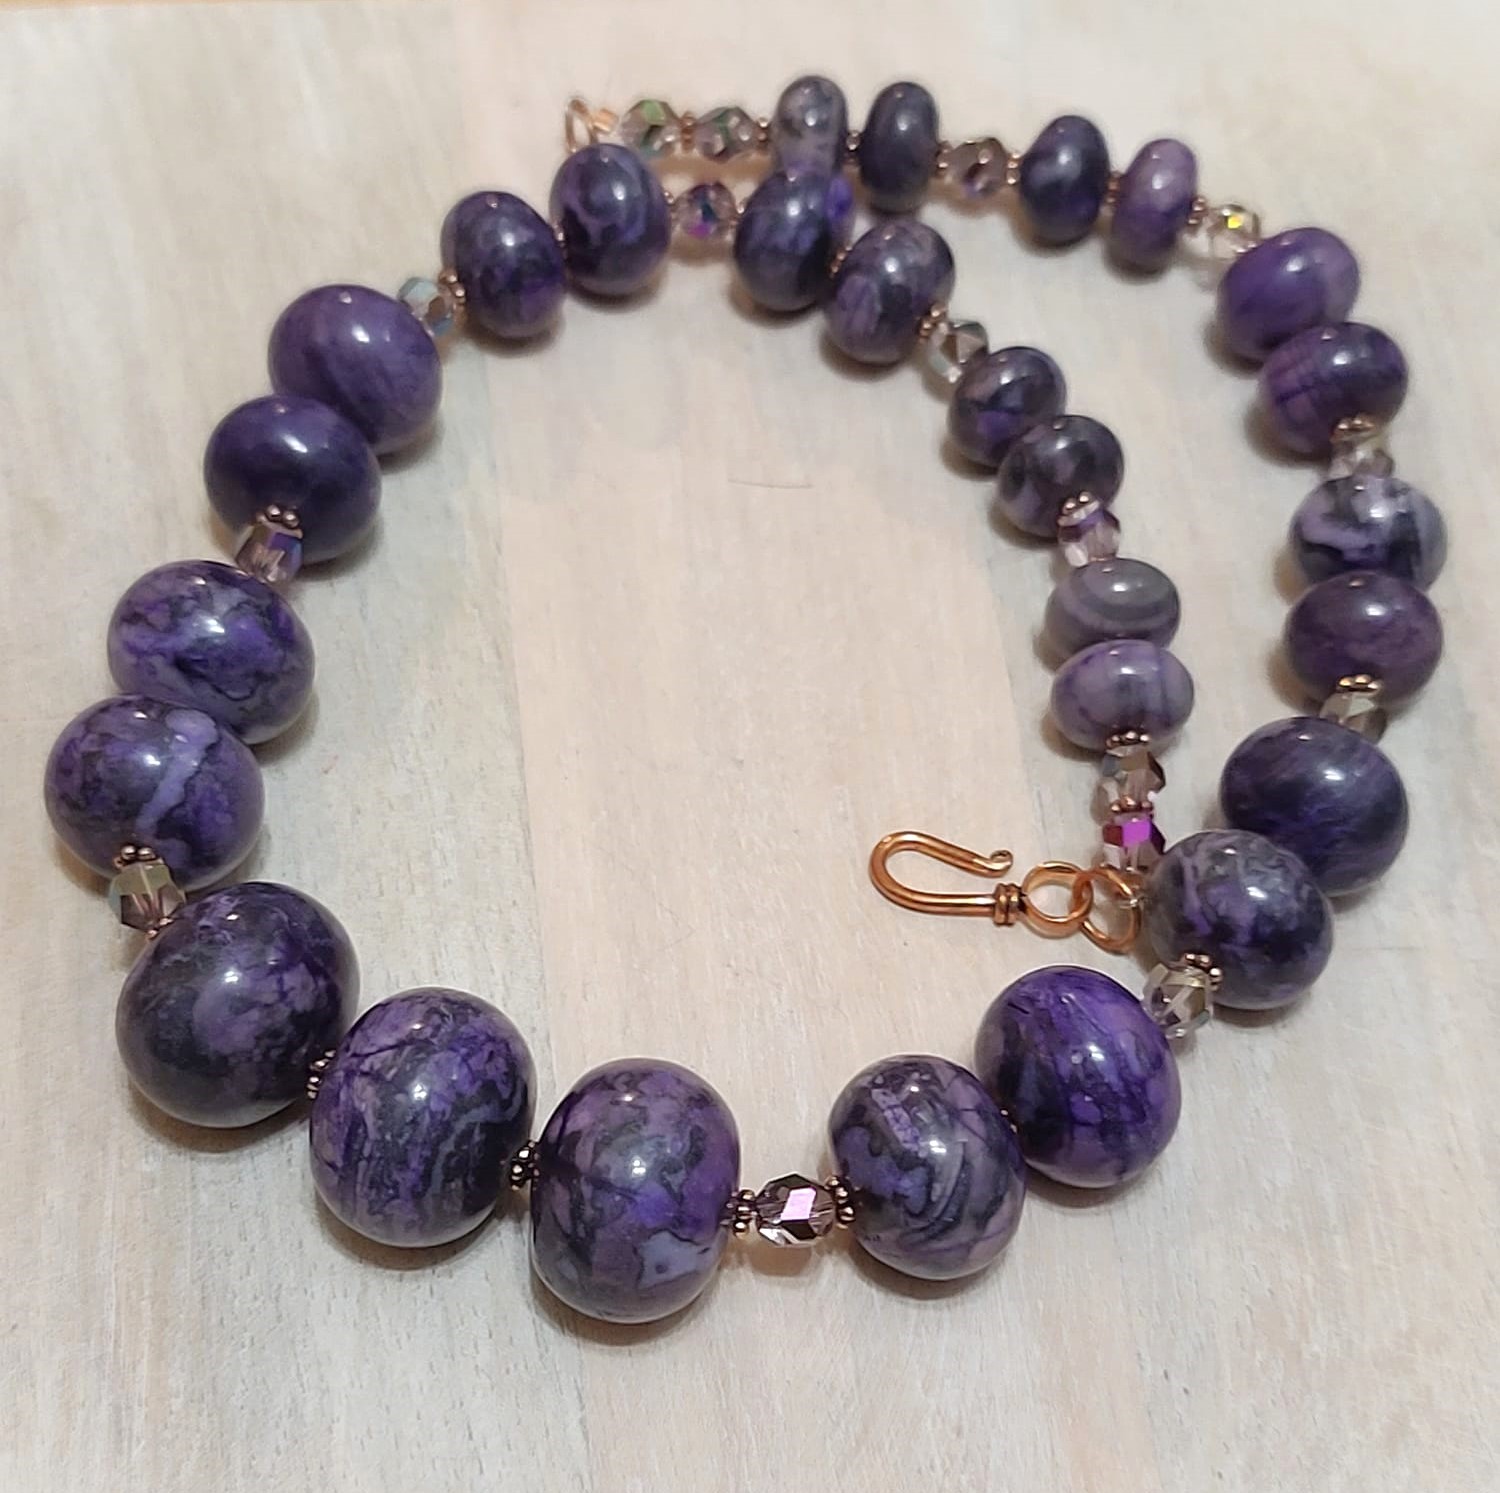 Purple agate gemstone necklace with copper spacers and crystals